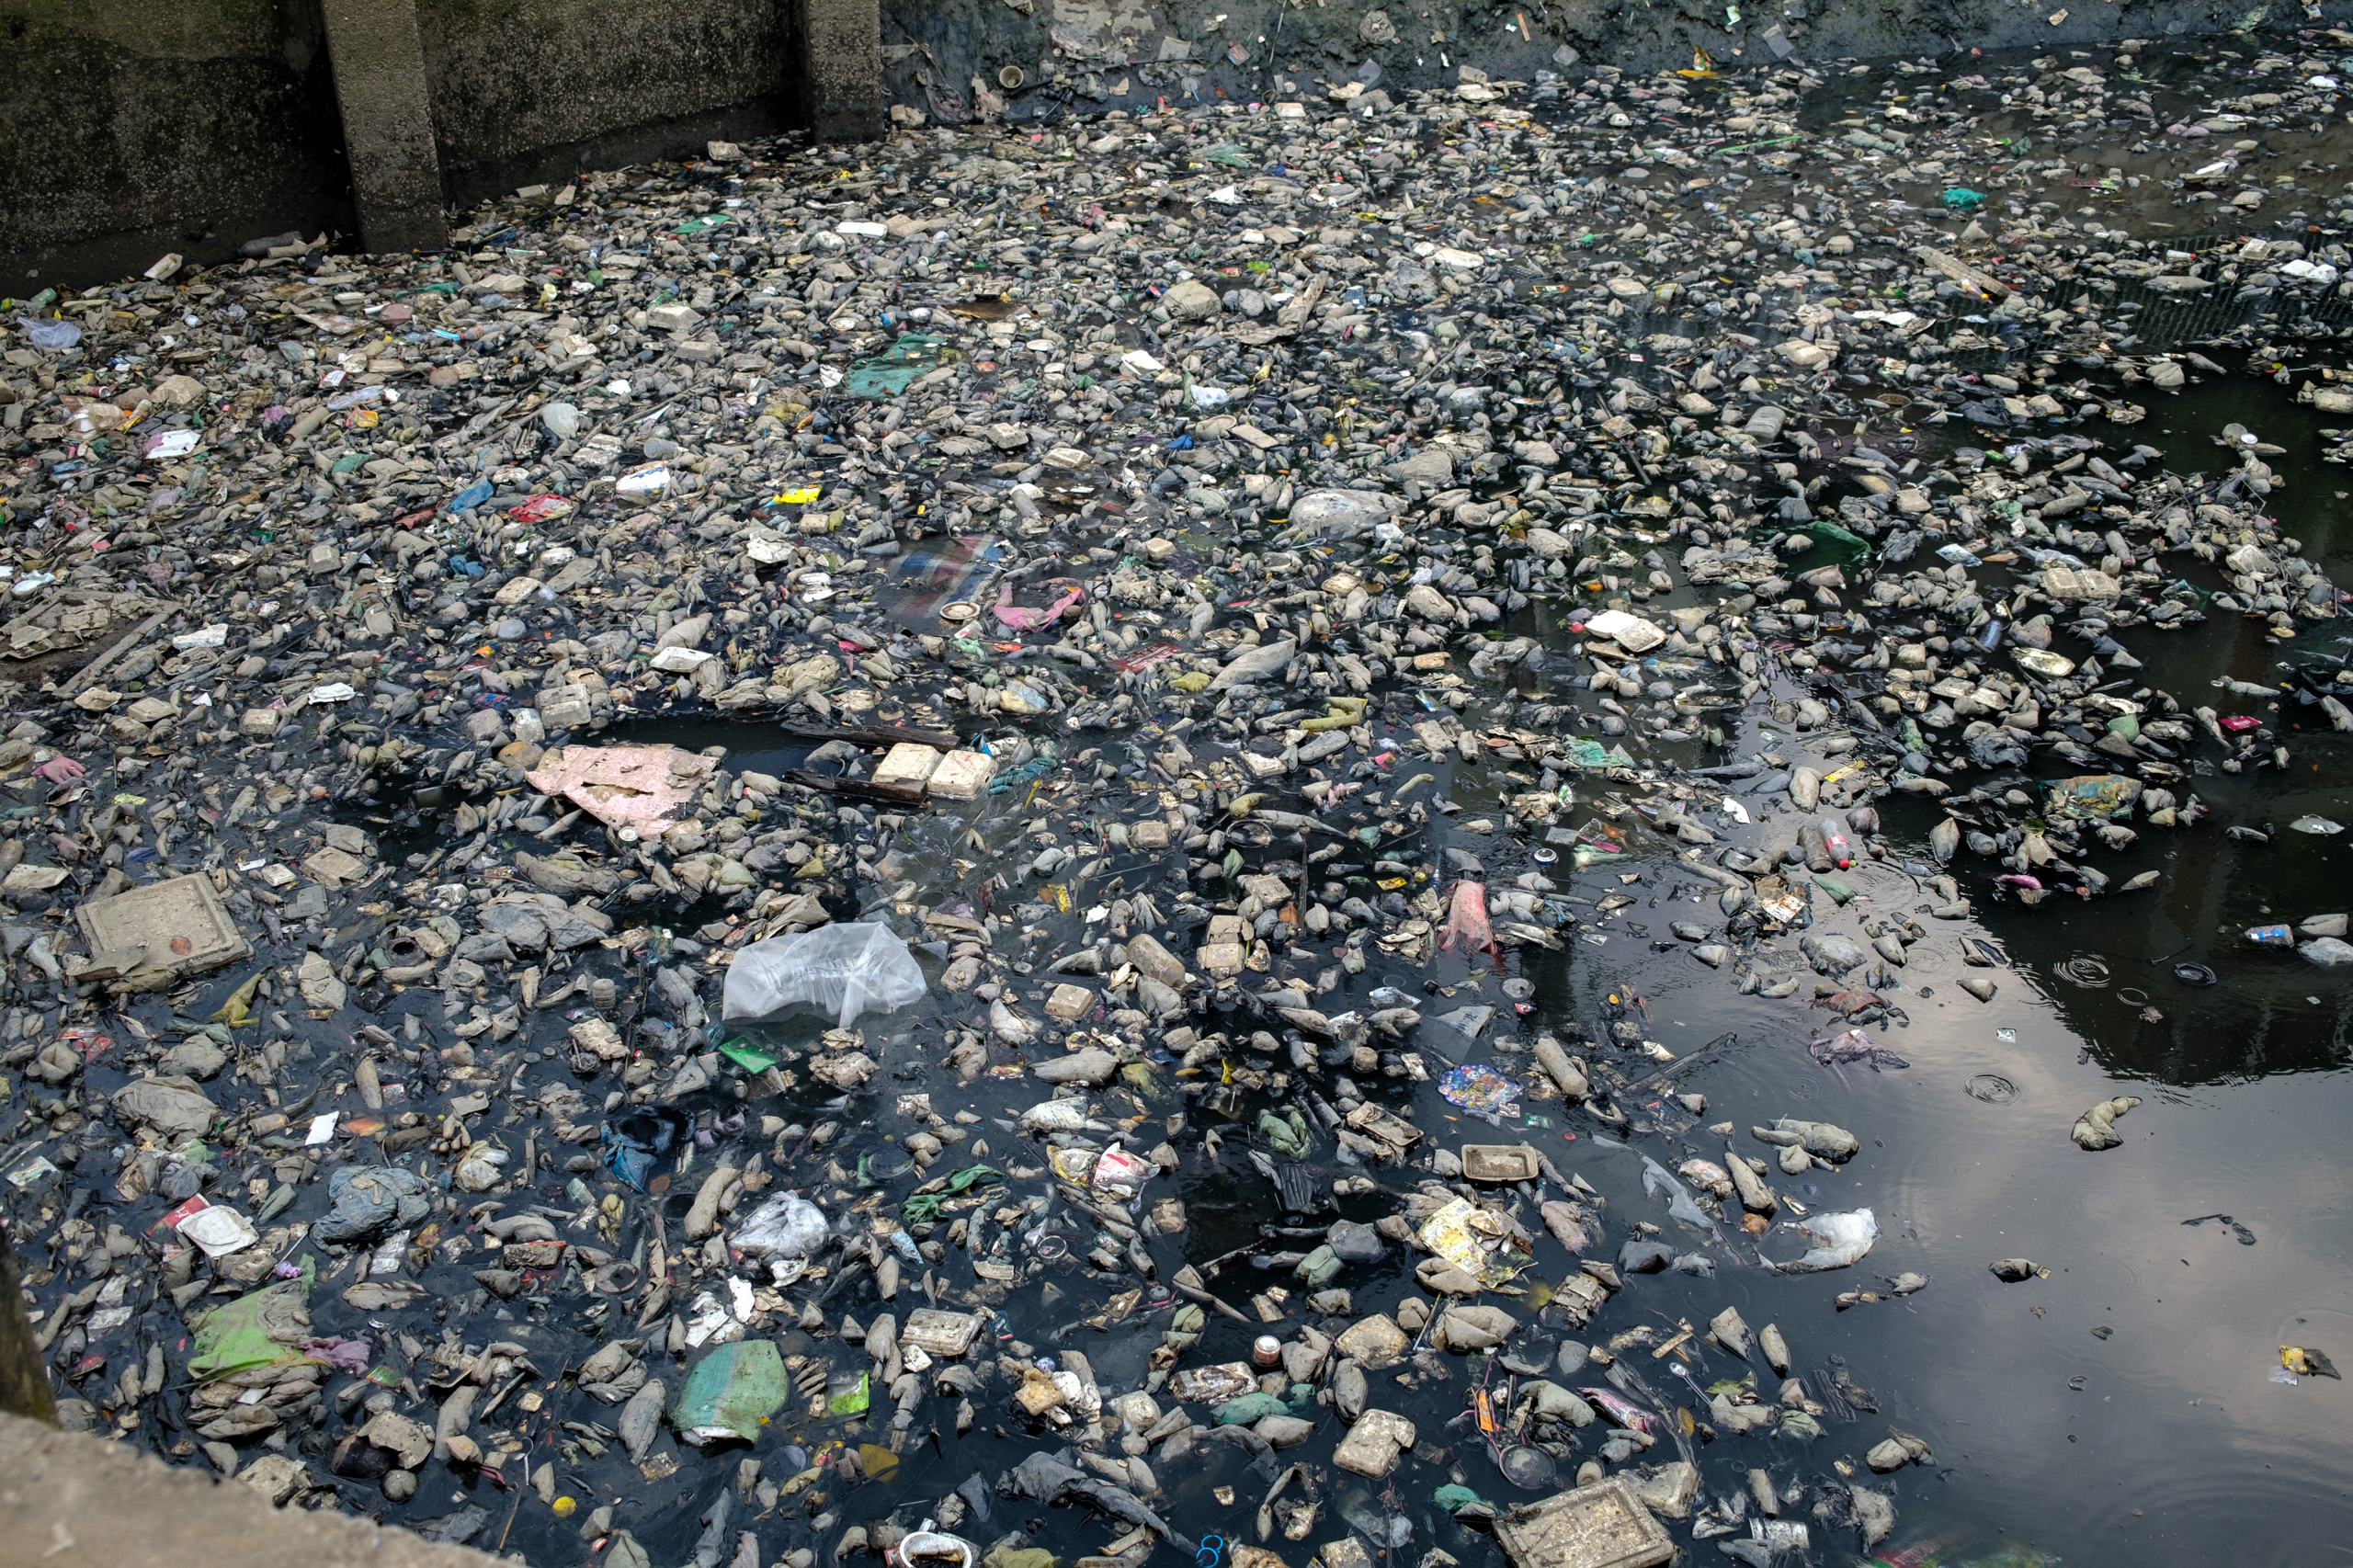 Plastic pollution collected in a river in Vietnam